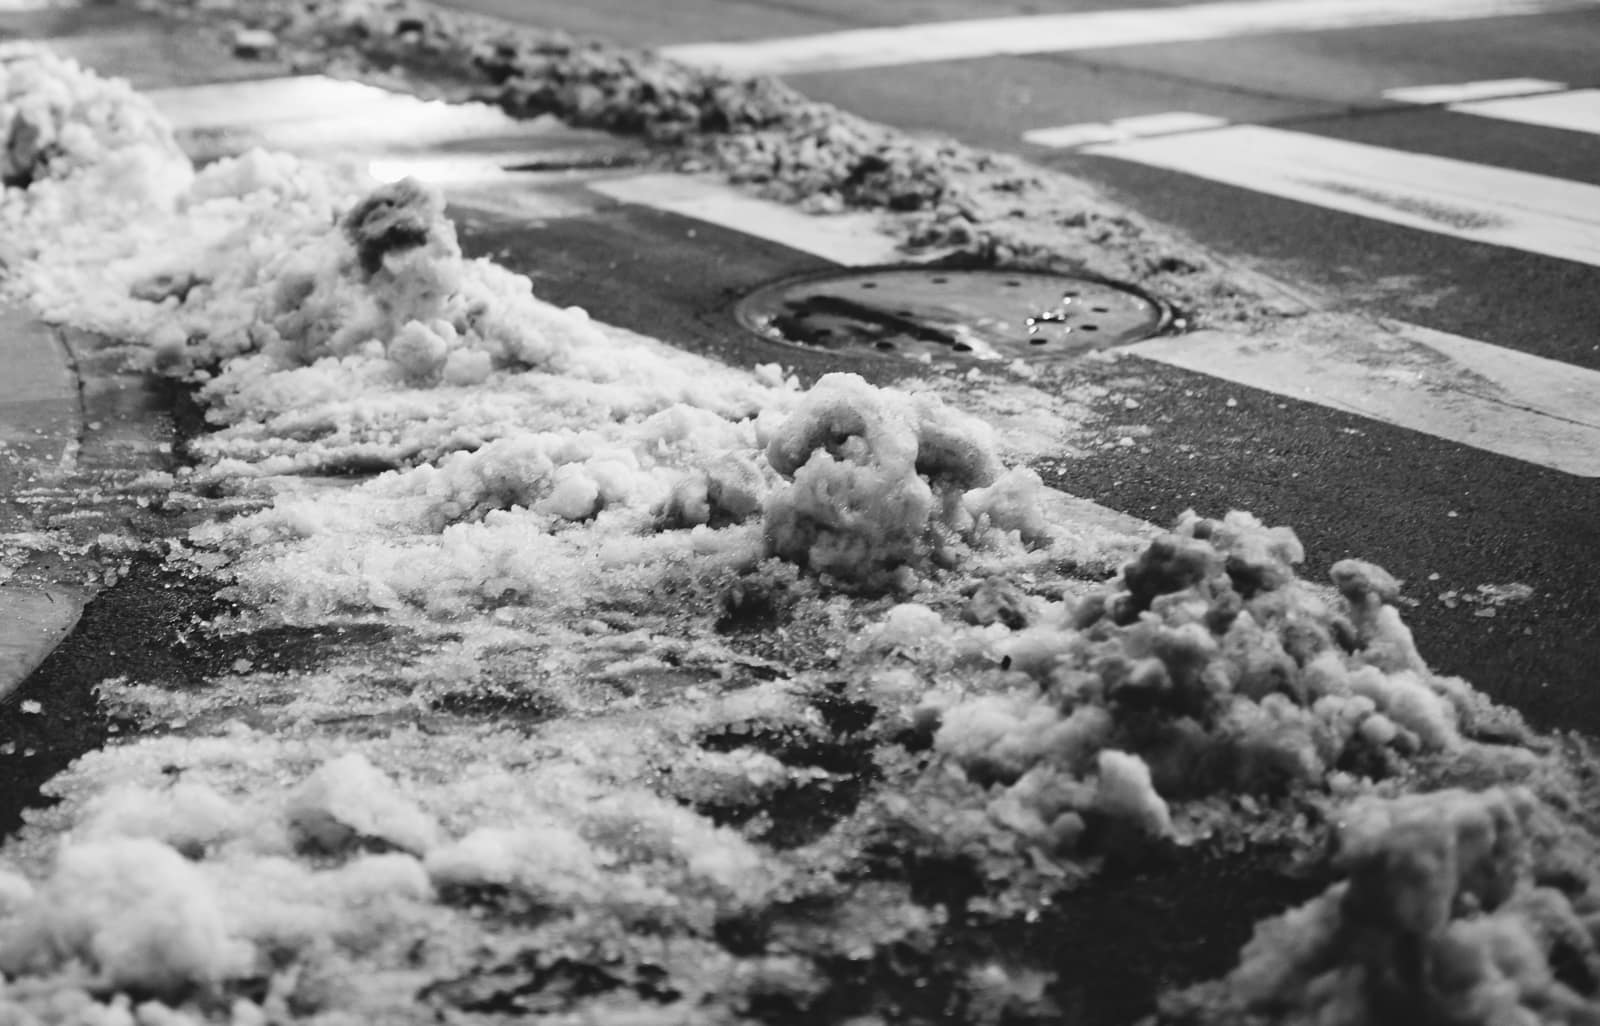 Snow on the sidewalk in downtown Chicago